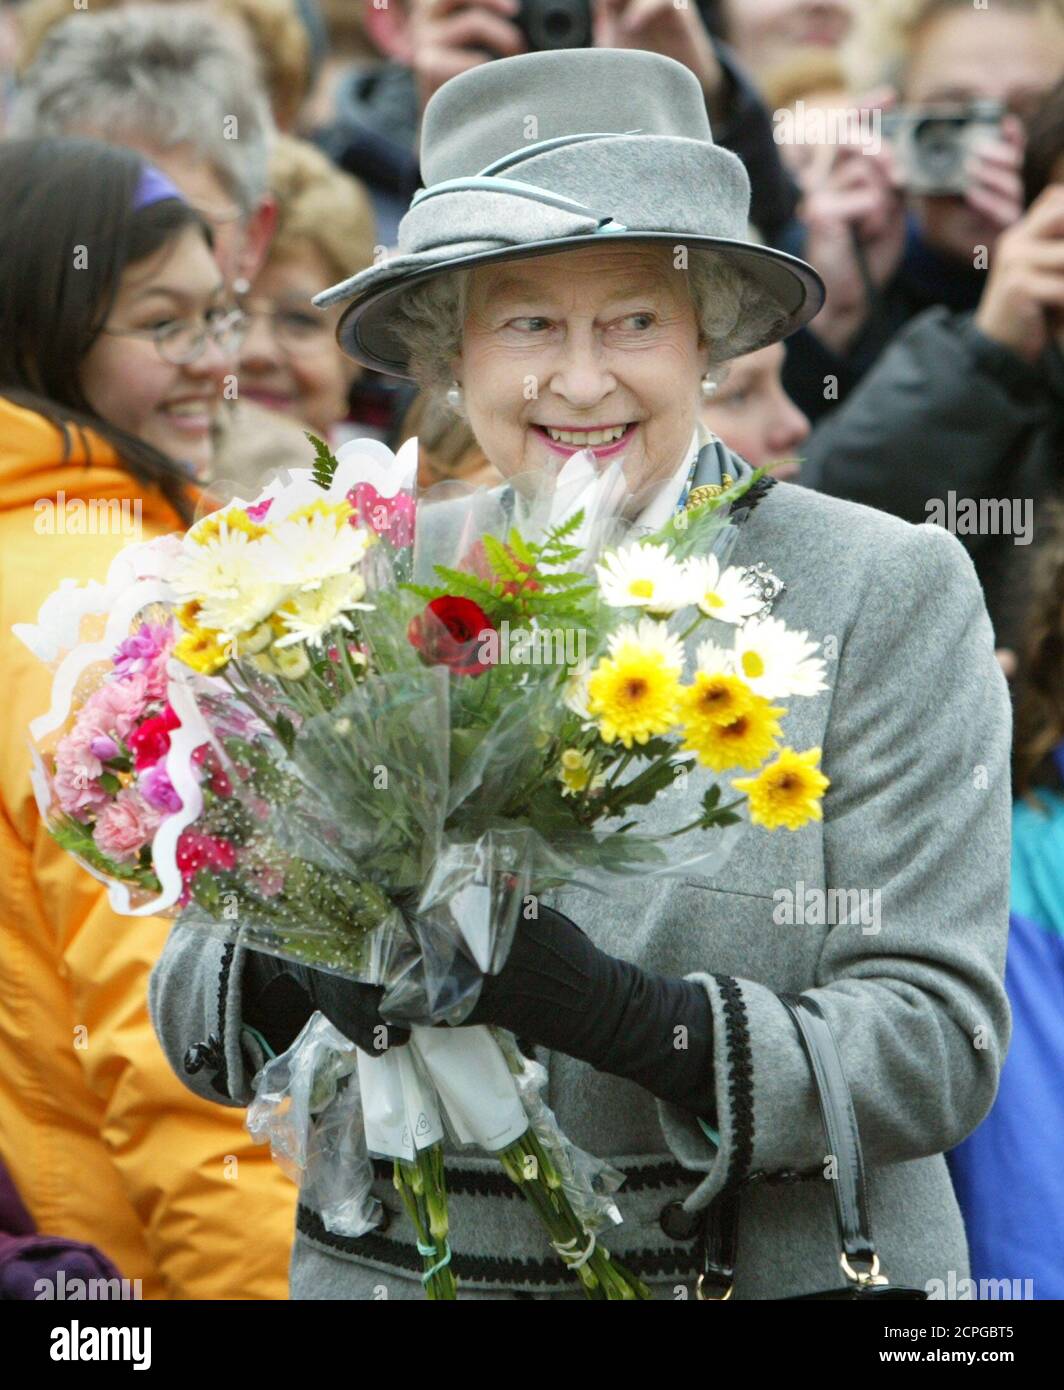 Queen Elizabeth II holds flowers given to her as she tours the Forks Market in Winnipeg, Manitoba, October 8, 2002. The Queen is currently on an 11-day Golden Jubilee tour of Canada. REUTERS/Shaun Best  SB Stock Photo